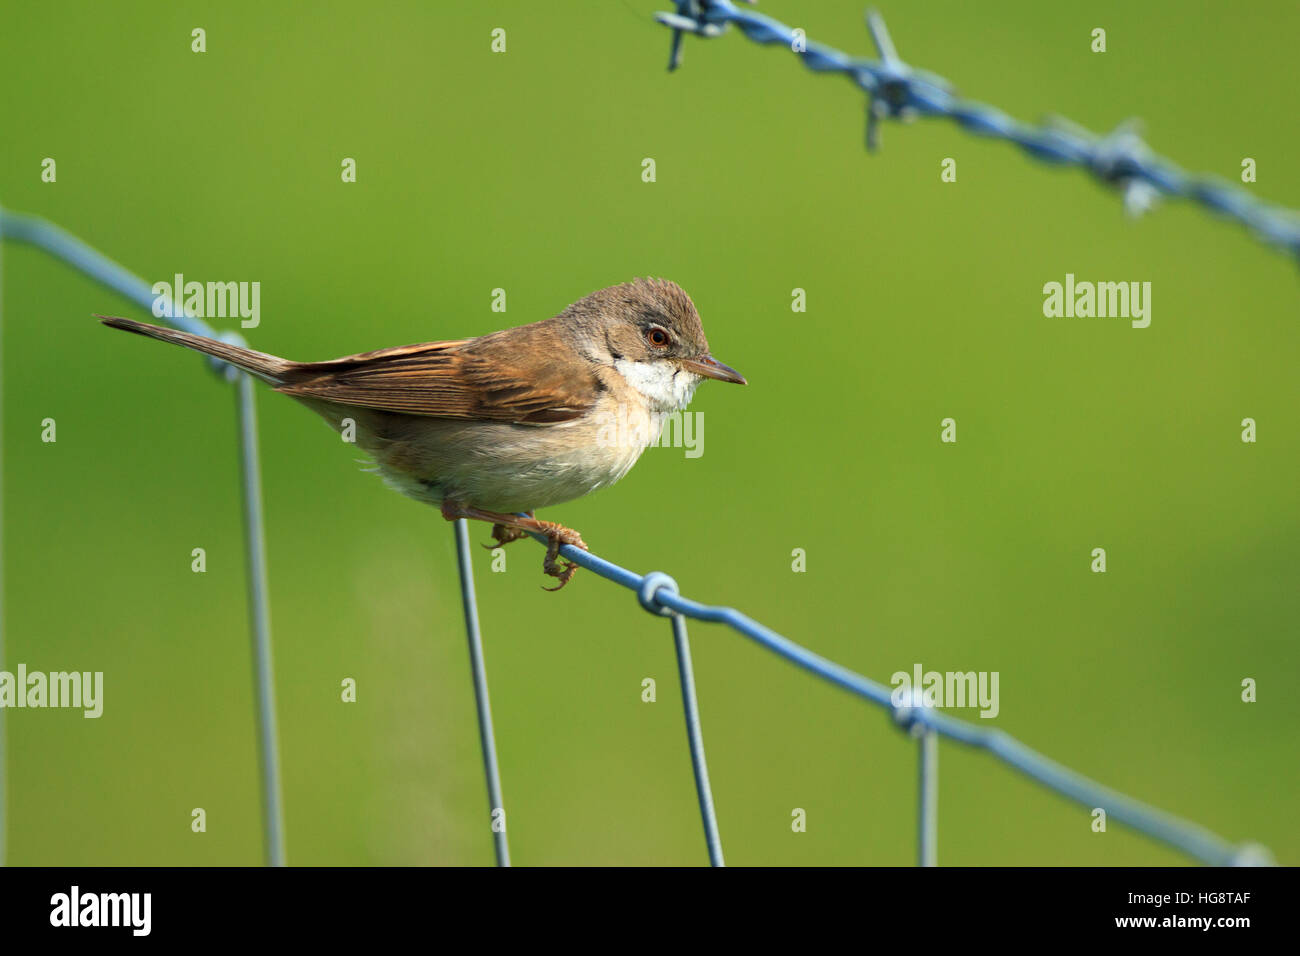 Common Whitethroat warbler (Sylvia communis) perched on sheep fencing with green field background.  Fauvette grisette.  Dorngrasmücke. Curruca Zarcera Stock Photo